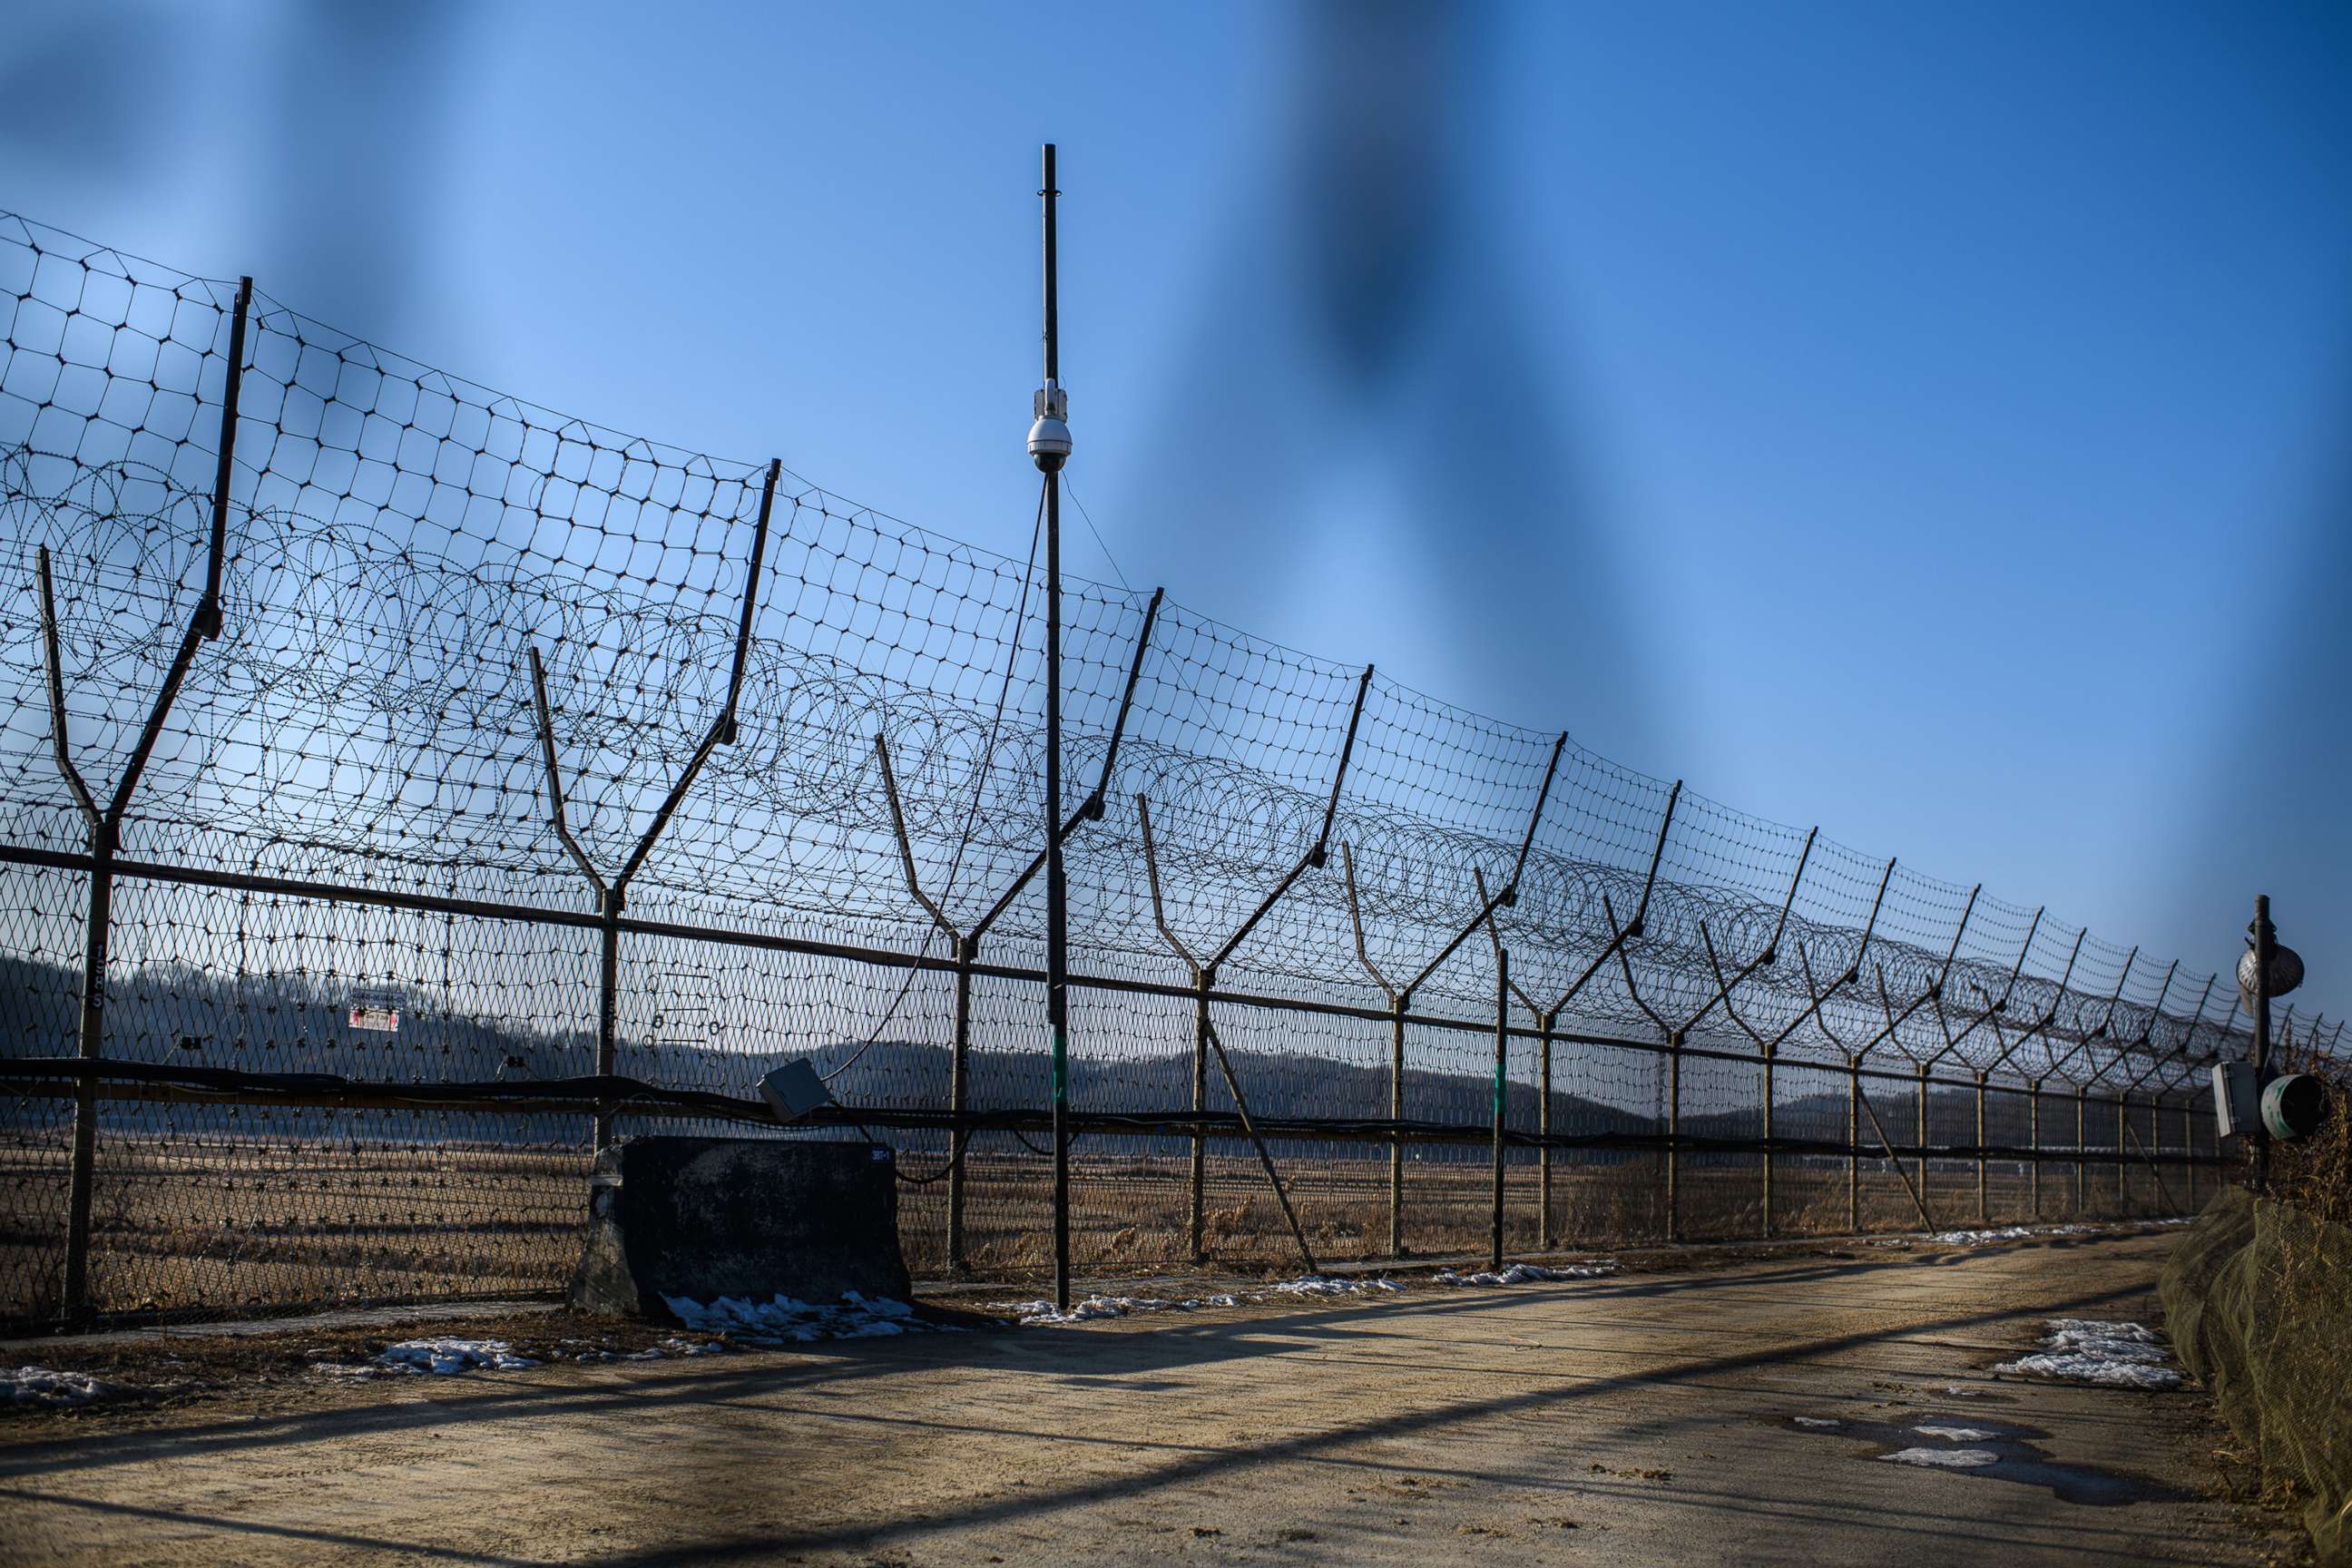 PHOTO: A barbed wire fence runs alongside the Han River near the Demilitarized Zone (DMZ) between South and North Korea, Feb, 7, 2018 near Panmunjom, South Korea.